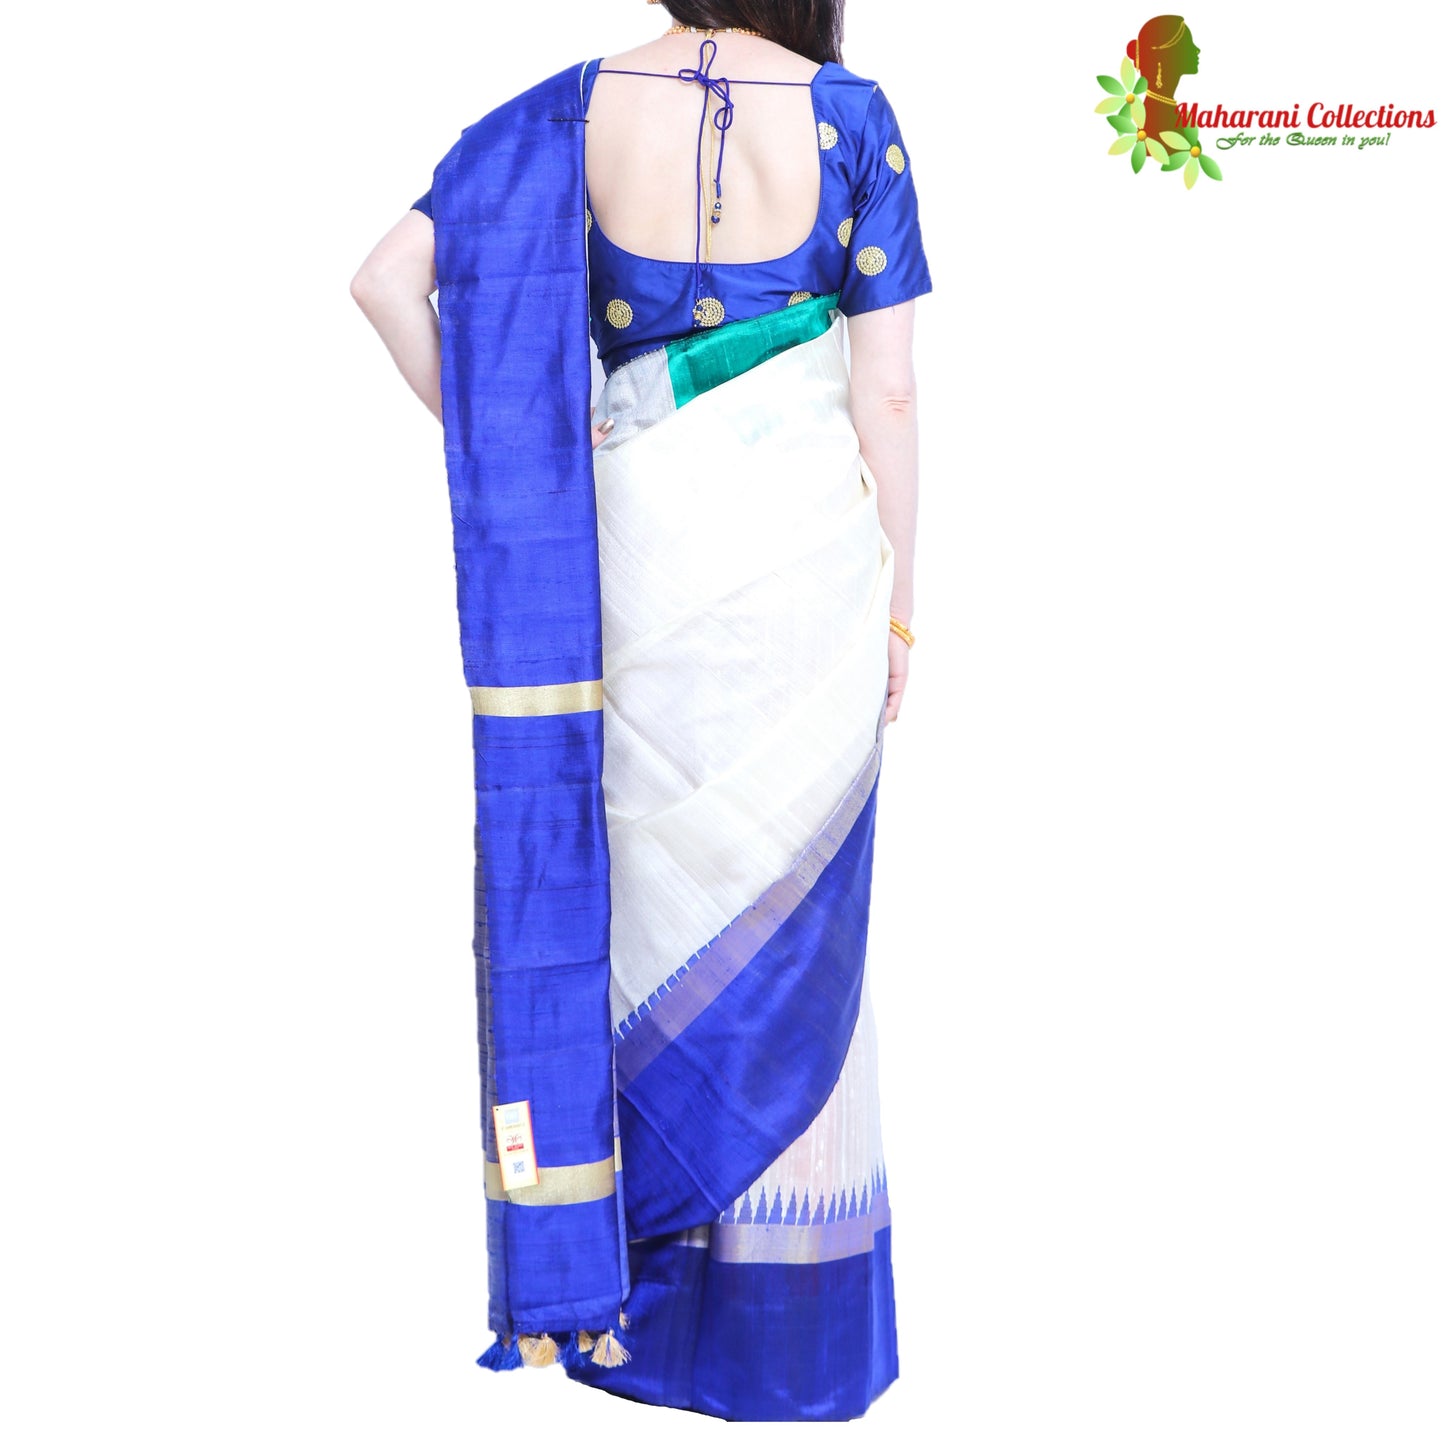 Pure Handloom Tussar Silk Saree - White, Green and Blue with Golden Zari and Temple Border